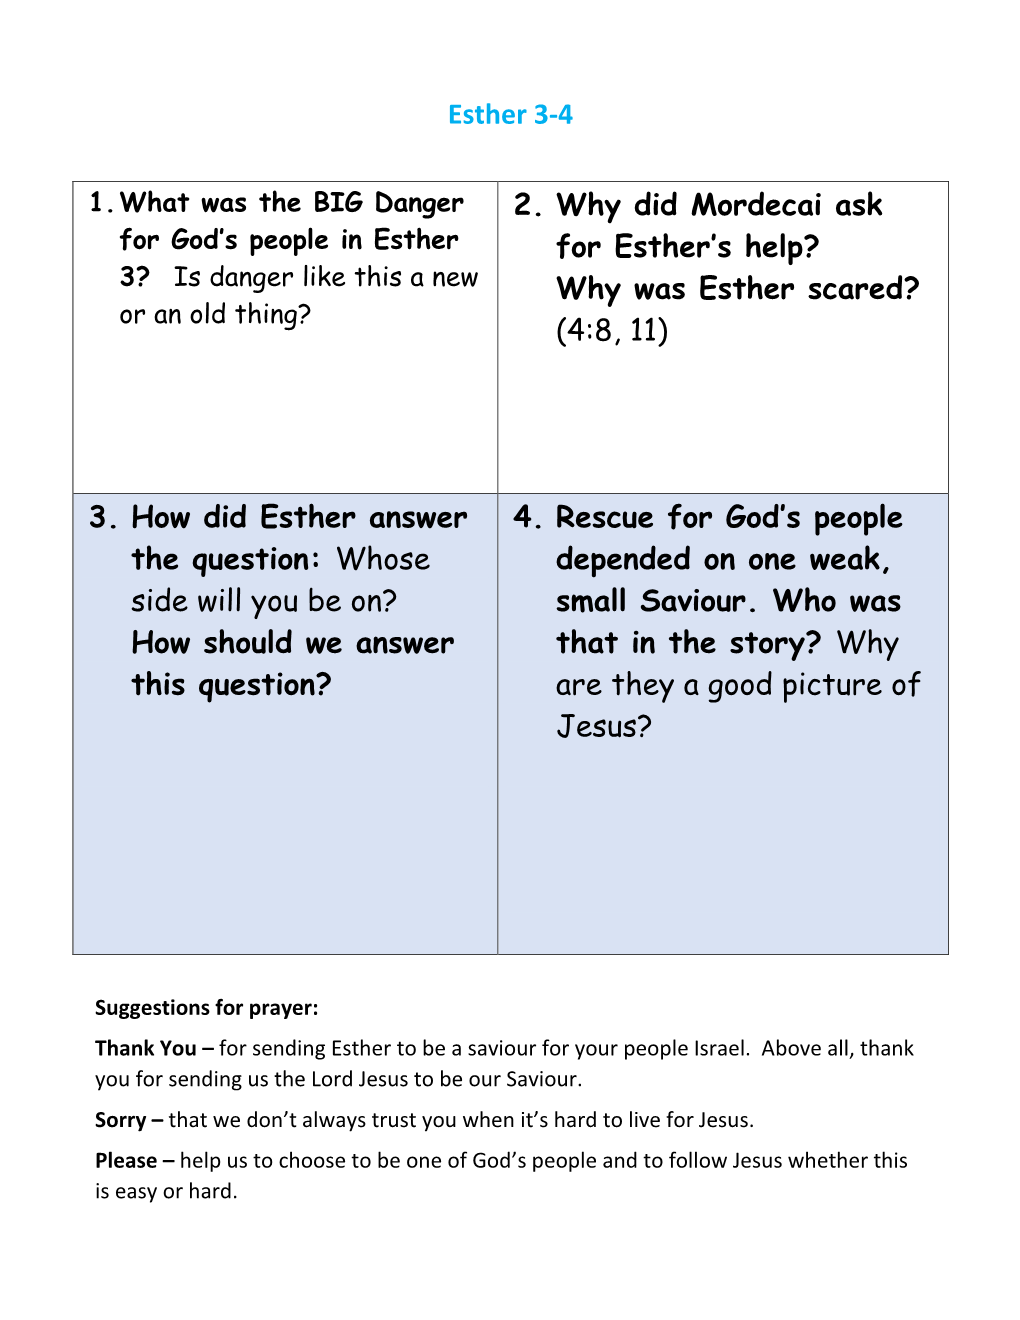 Esther 3-4 2. Why Did Mordecai Ask for Esther's Help?